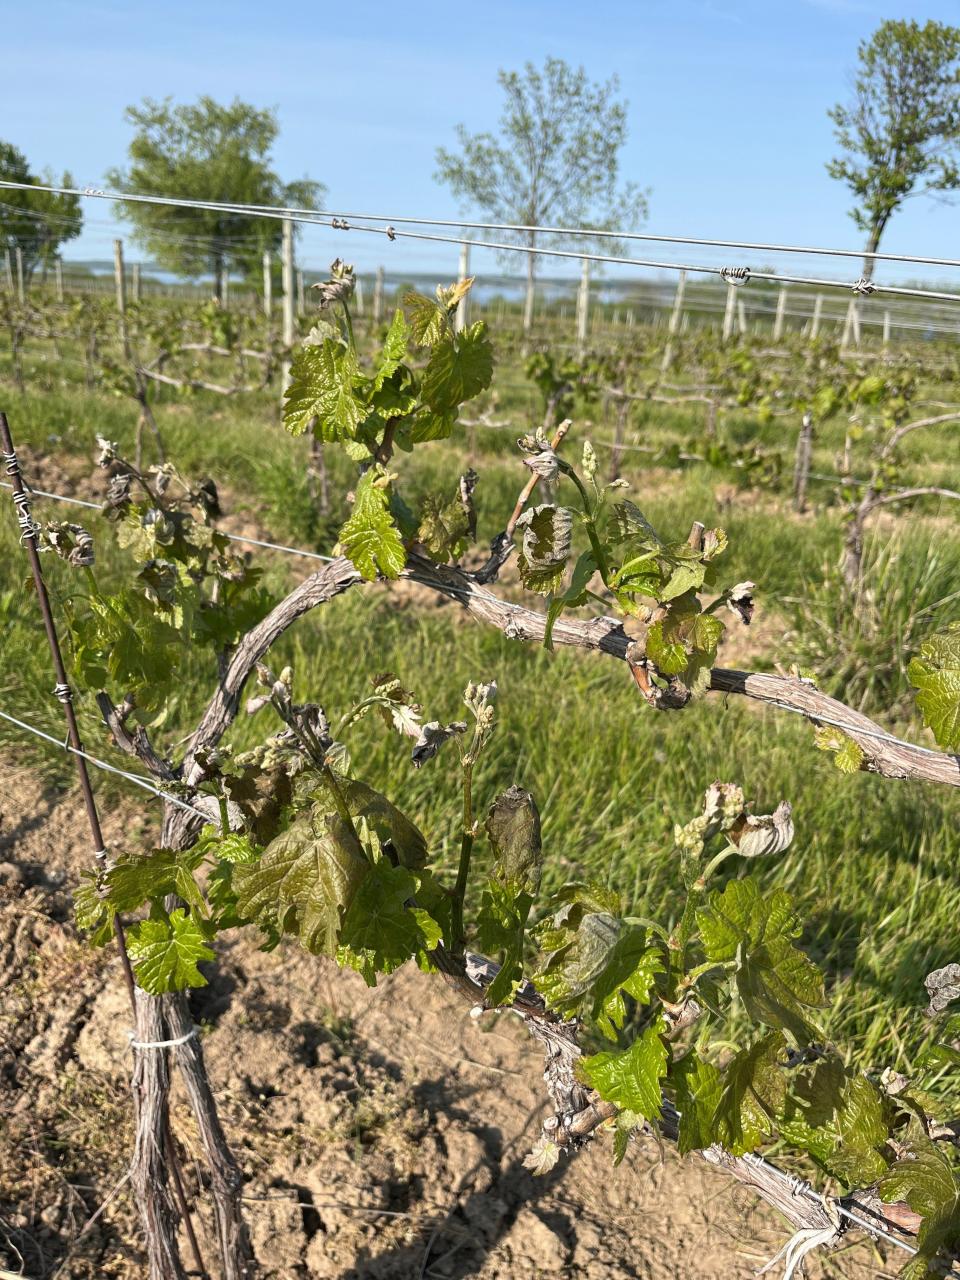 The curled leaves show damage to Cabernet Franc vines at Kashong Glen Vineyards on Seneca Lake on May 18, 2023. It's too soon to tell the effect it will have on the harvest.